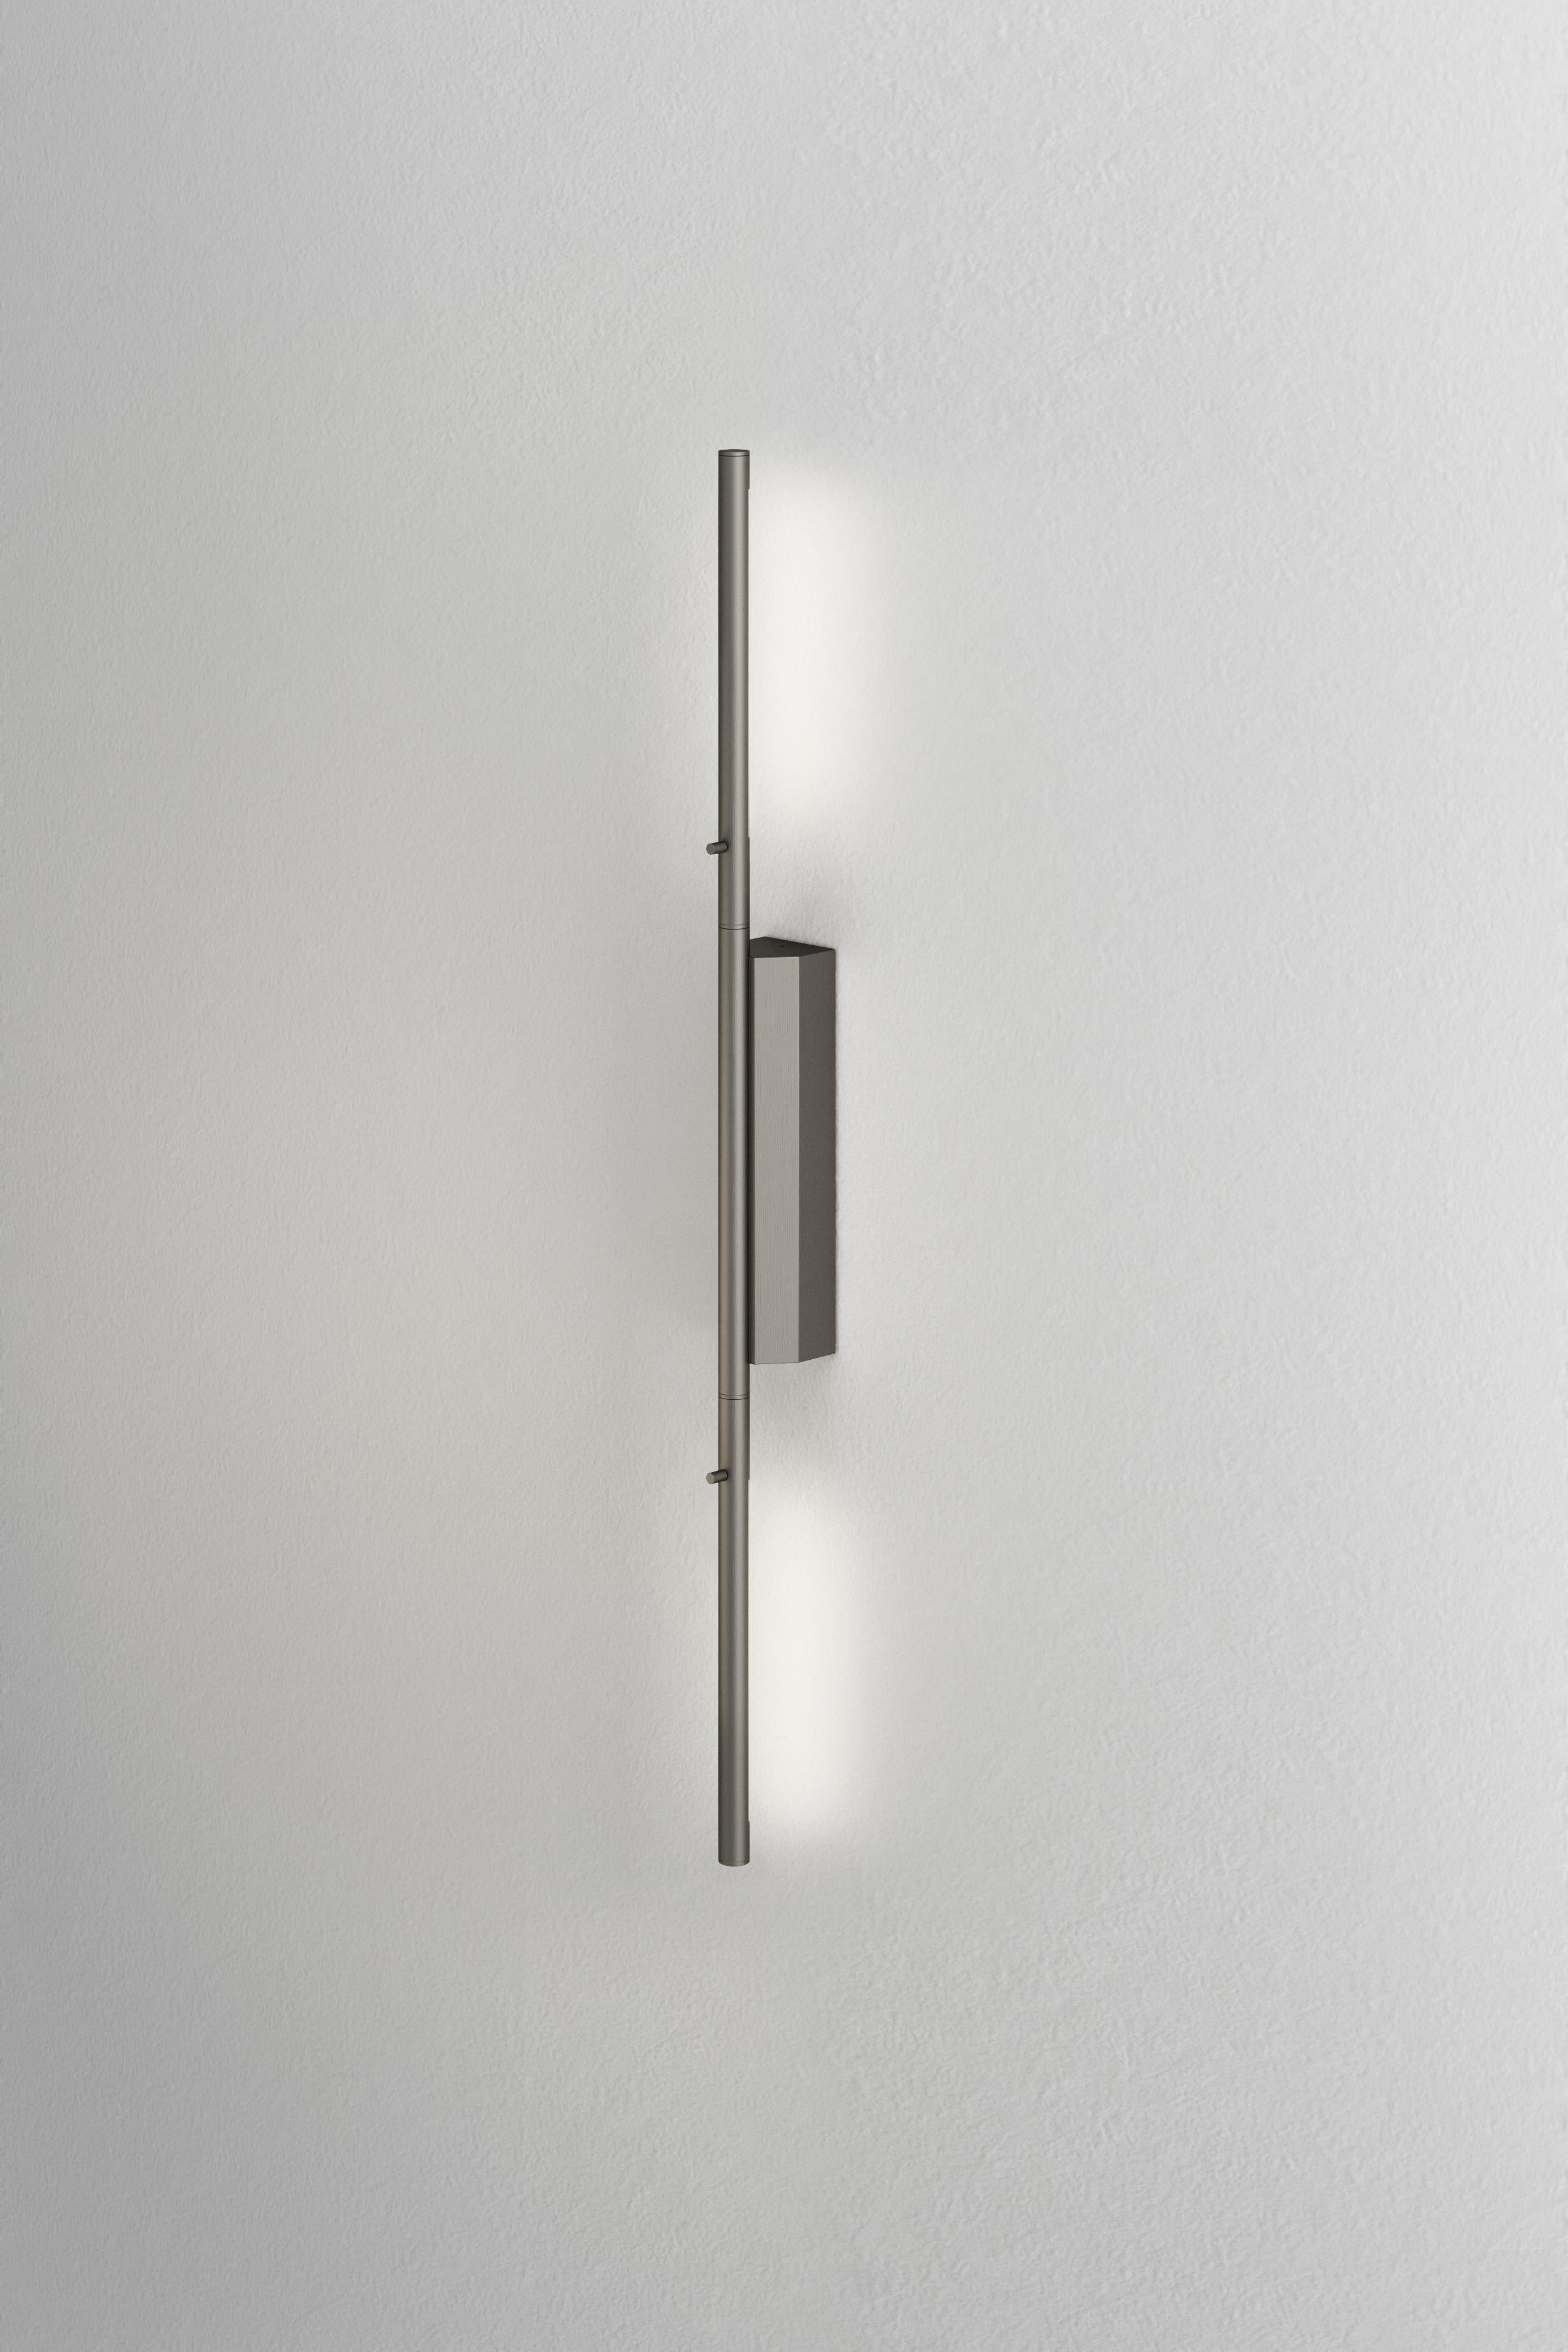 IP link double 610 Satin Graphite wall light by Emilie Cathelineau
Dimensions: D 4.5 x W 5 x H 61 cm
Materials: Solid brass, Satin Graphite, LED, Polycarbonate.
Others finishes and dimensions are available.

All our lamps can be wired according